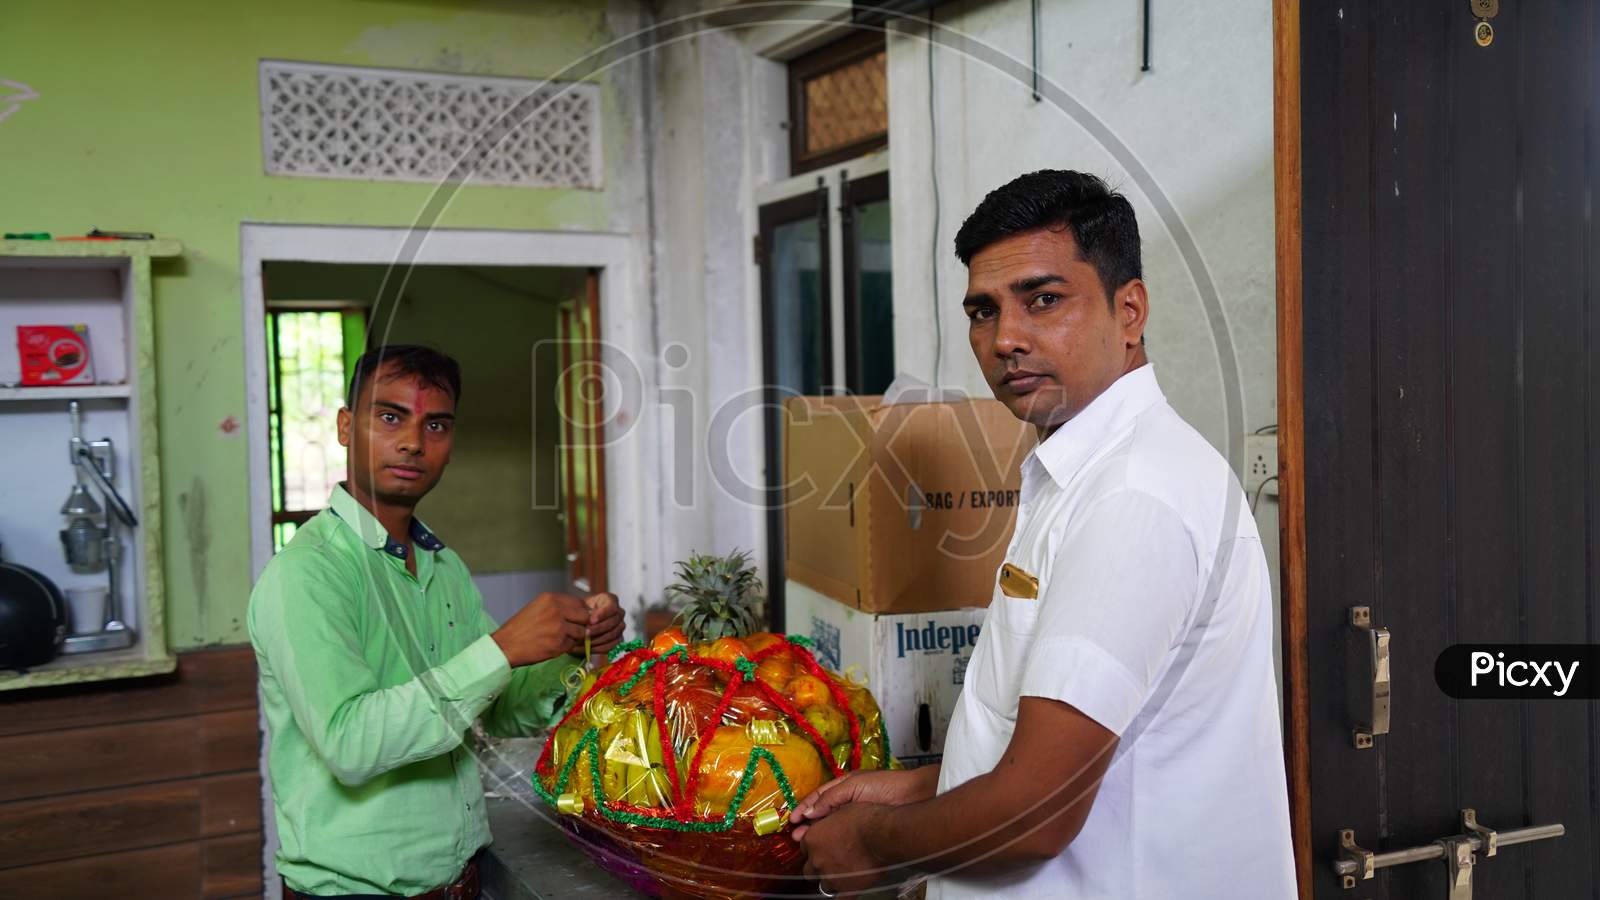 20 September 2020 : Reengus, Jaipur, India / Two Male Movers Wrapping The Home Appliances With Plastic Wrap On Home Background